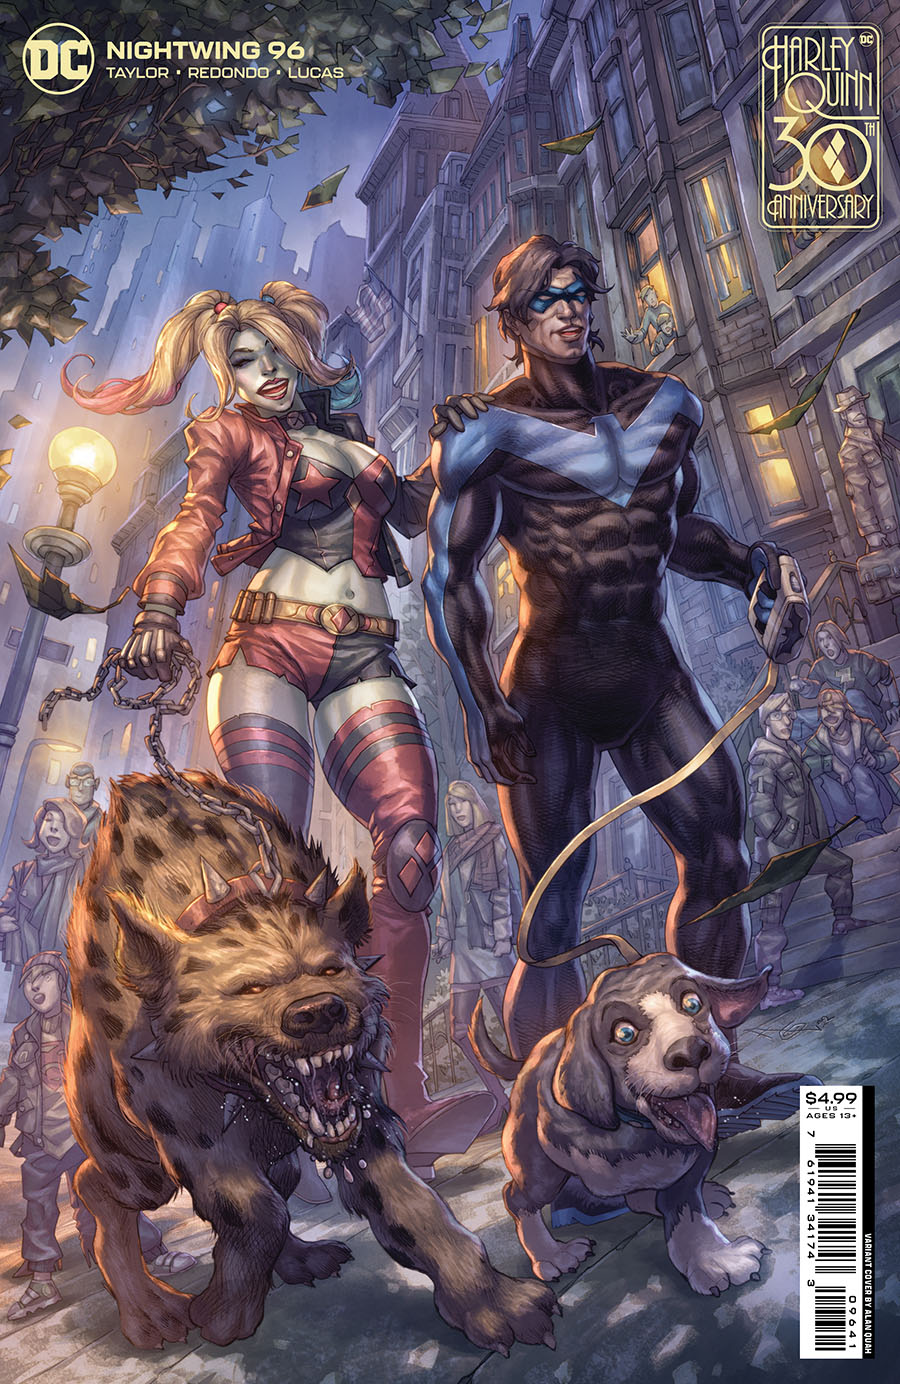 Nightwing Vol 4 #96 Cover C Variant Alan Quah Harley Quinn 30th Anniversary Card Stock Cover